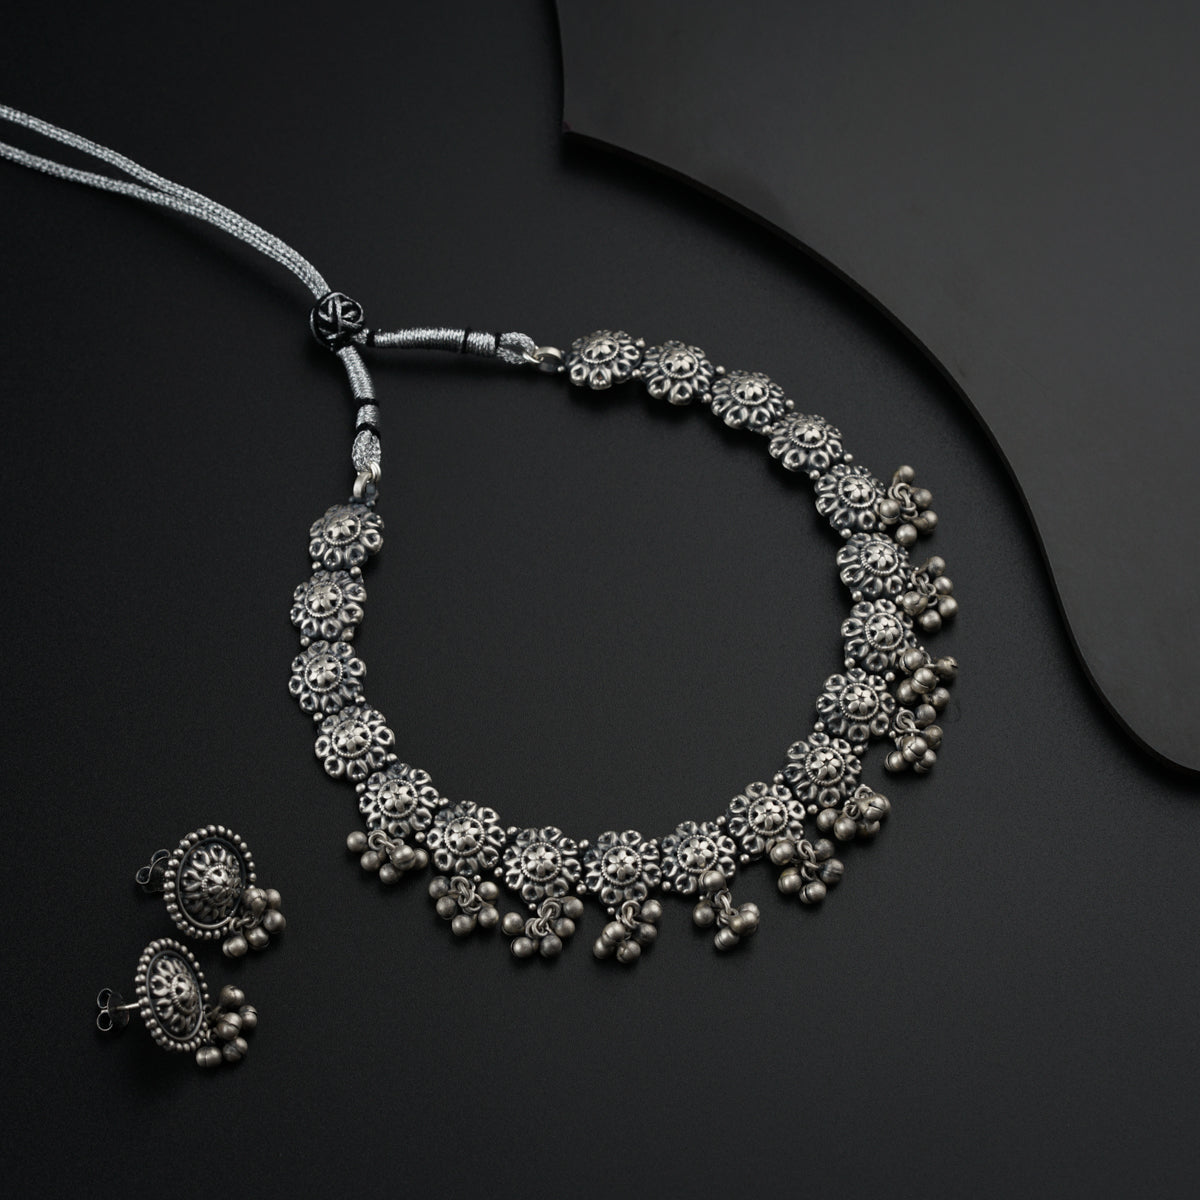 a silver necklace and matching earrings on a black surface